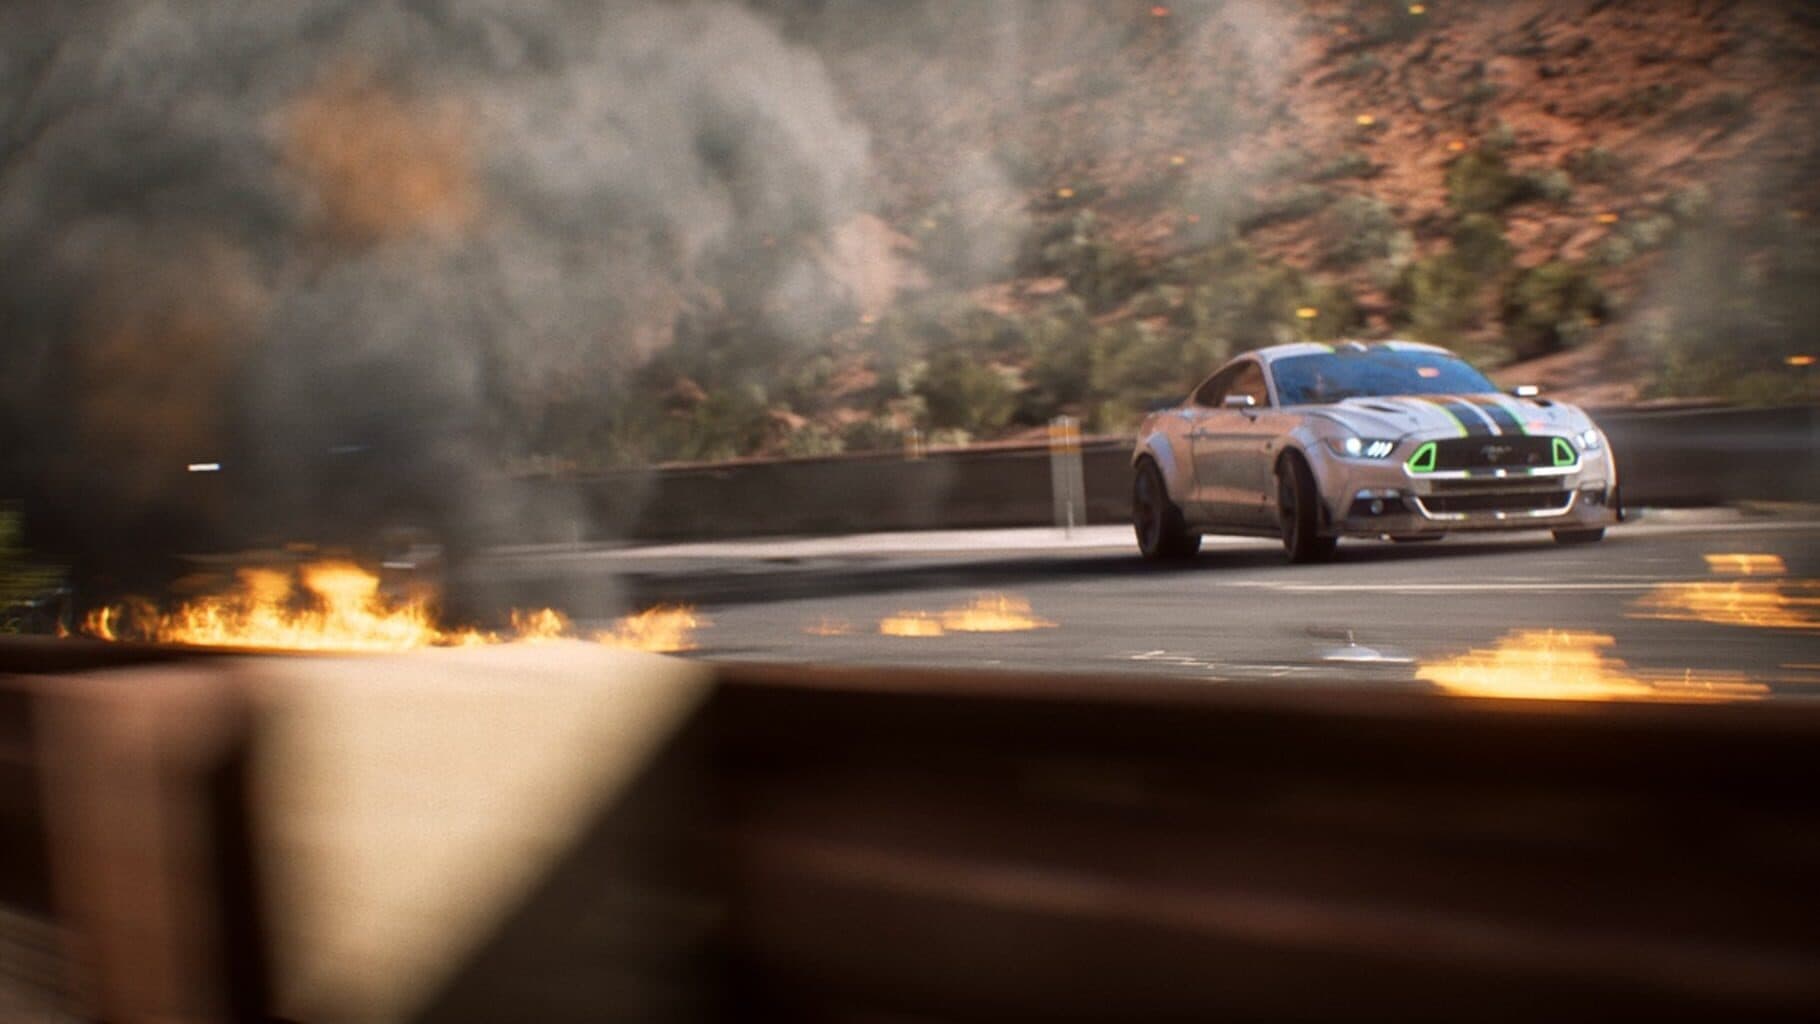 Need for Speed: Payback Image